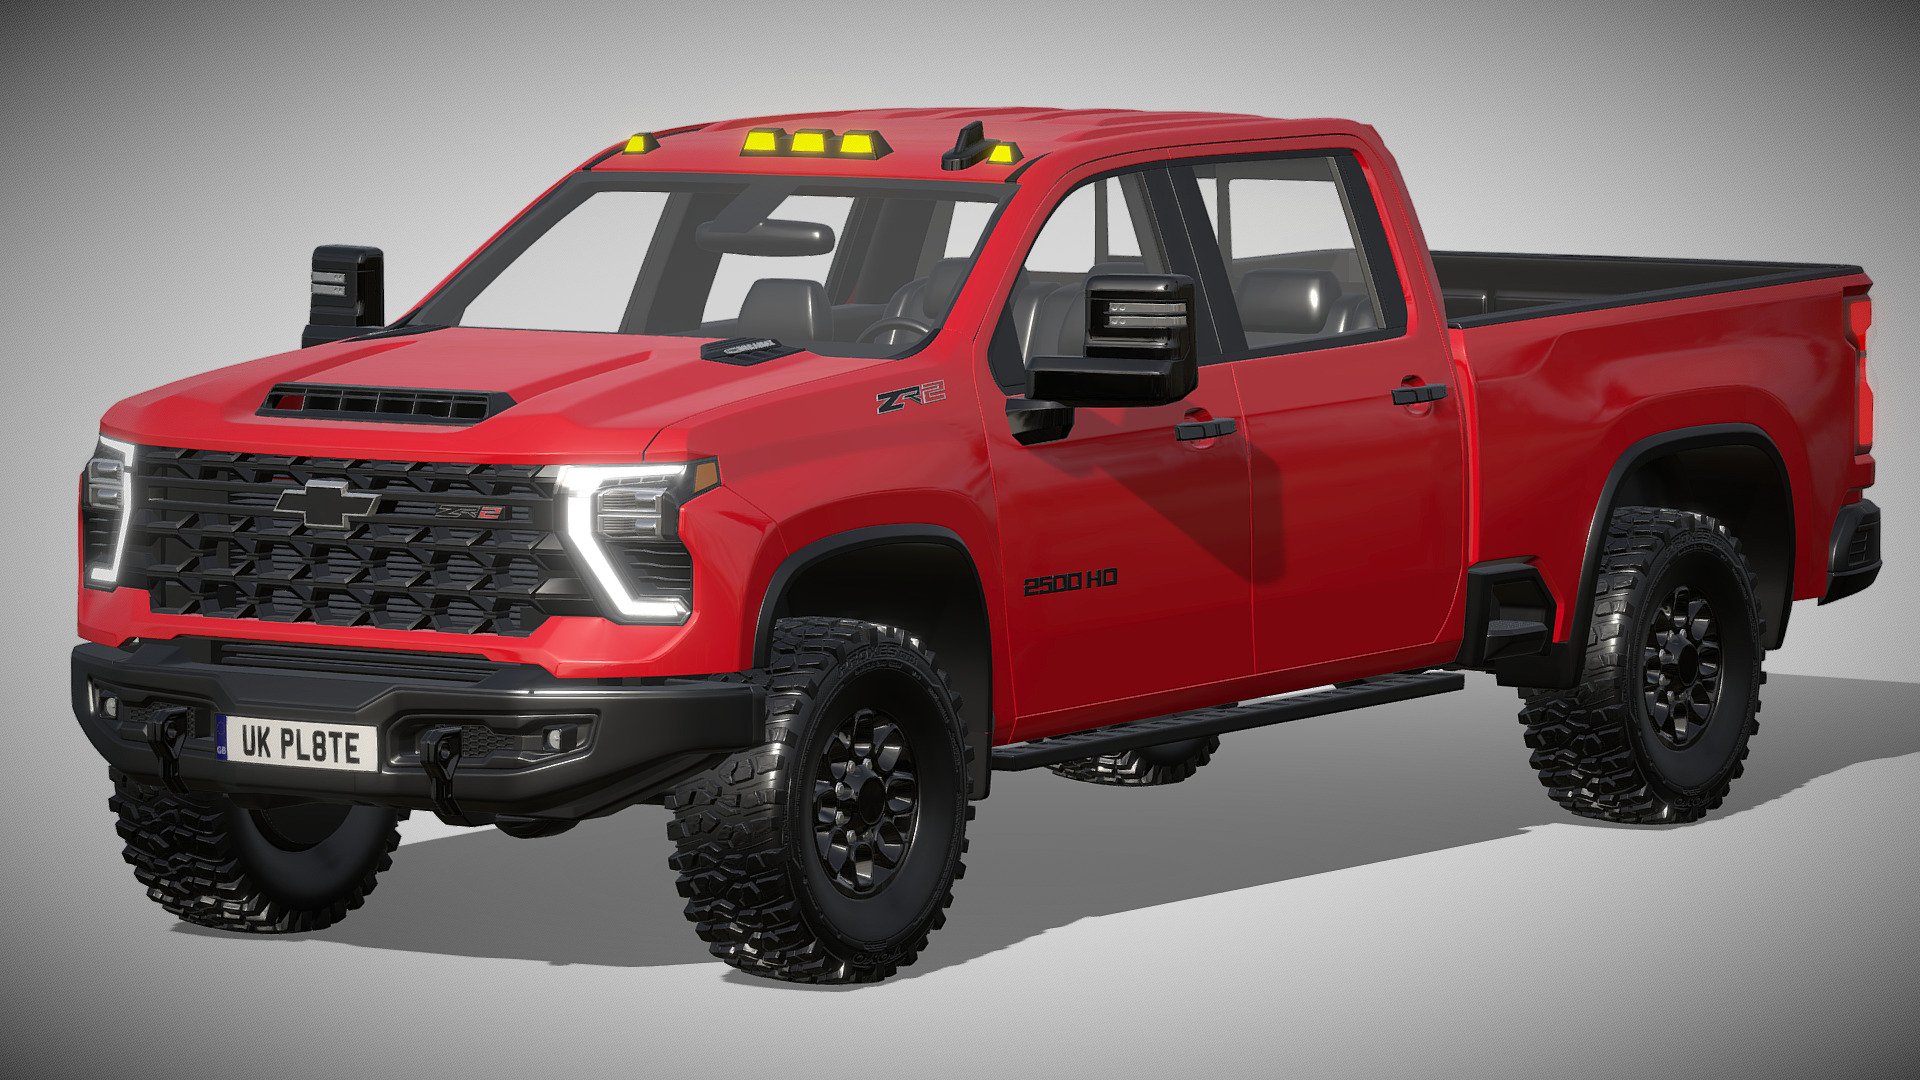 Chevrolet Silverado HD ZR2 Bison 2024

https://www.chevrolet.com/trucks/silverado/2500hd-3500hd

Clean geometry Light weight model, yet completely detailed for HI-Res renders. Use for movies, Advertisements or games

Corona render and materials

All textures include in *.rar files

Lighting setup is not included in the file! - Chevrolet Silverado HD ZR2 Bison 2024 - Buy Royalty Free 3D model by zifir3d 3d model